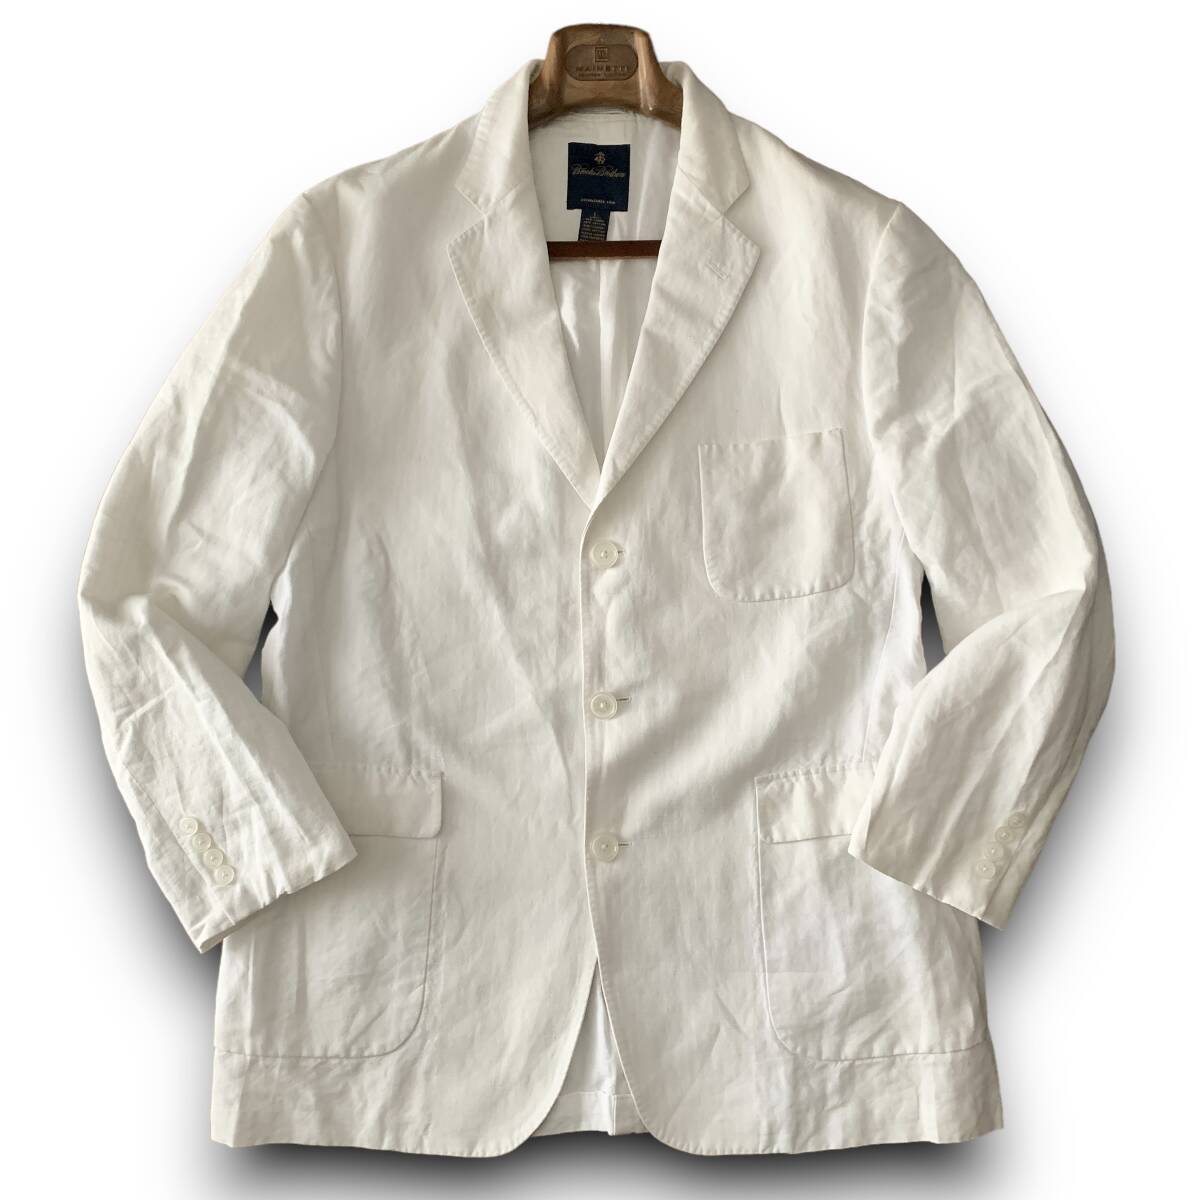 C12 beautiful goods finest quality linen material L size [ Brooks Brothers ] spring . feather woven . flax material gauze tailored jacket blaser eggshell white white color 